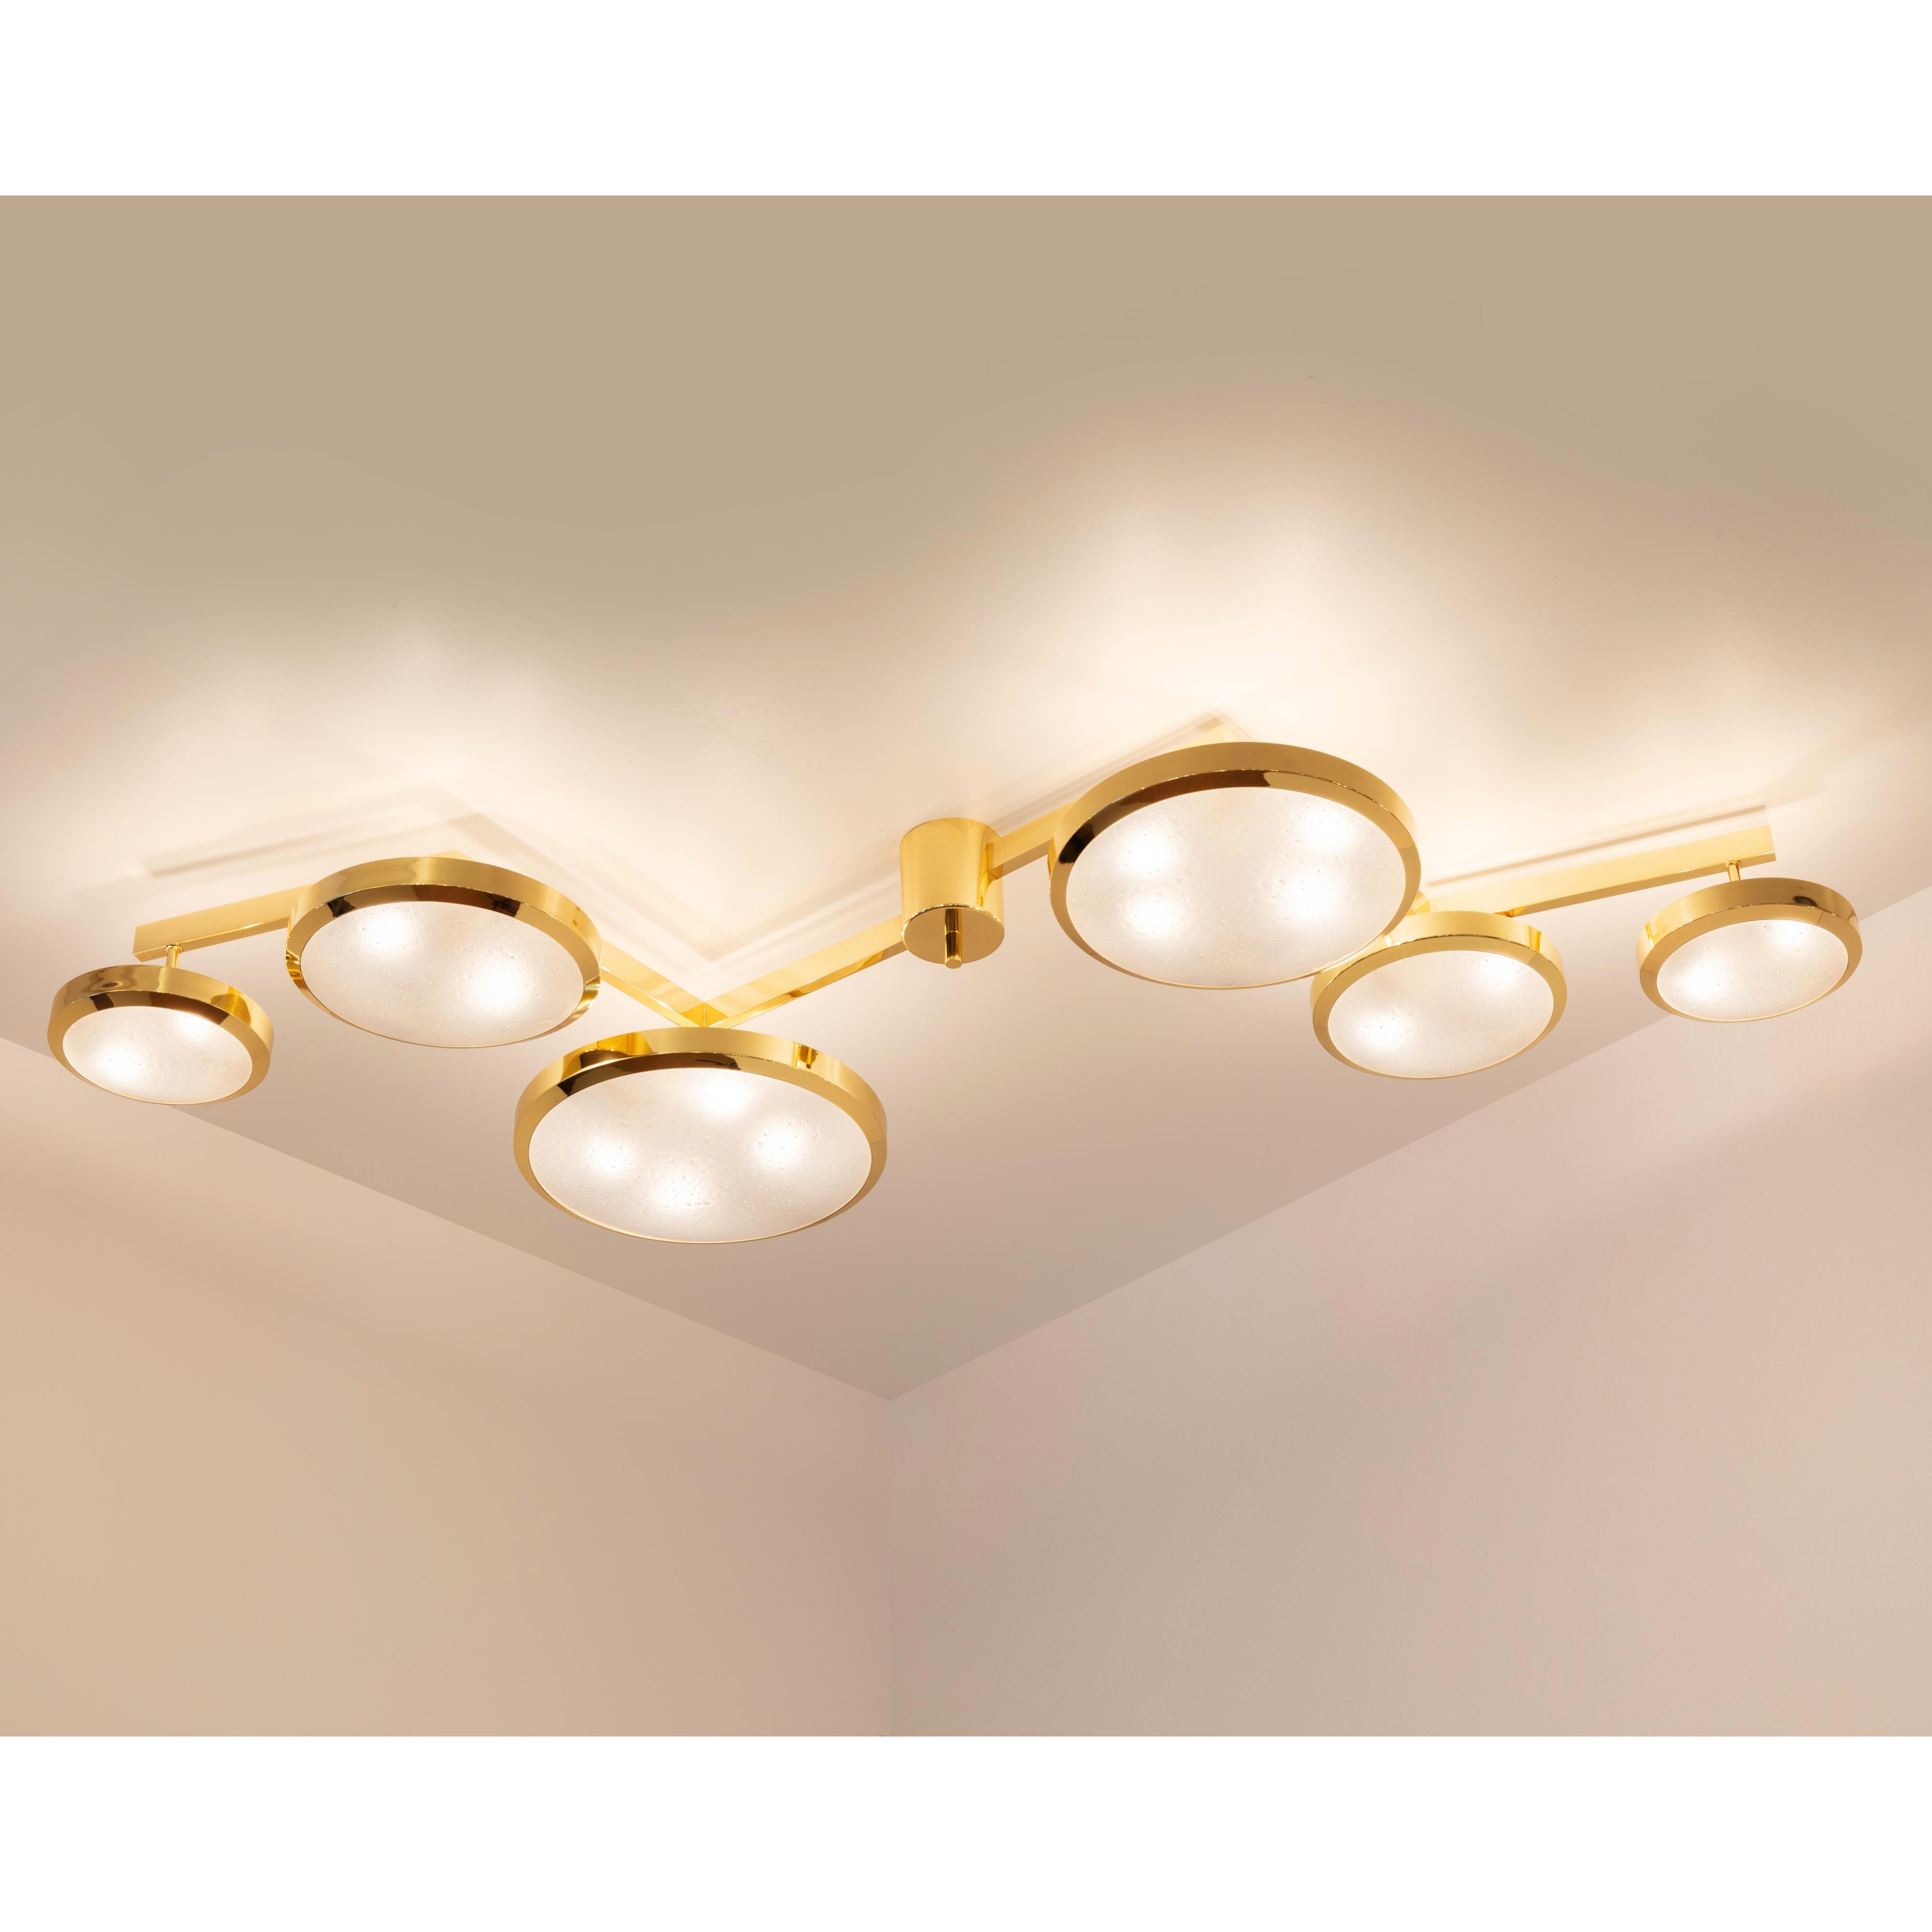 Contemporary Geometria Sospesa Ceiling Light by Gaspare Asaro-Polished Nickel Finish For Sale